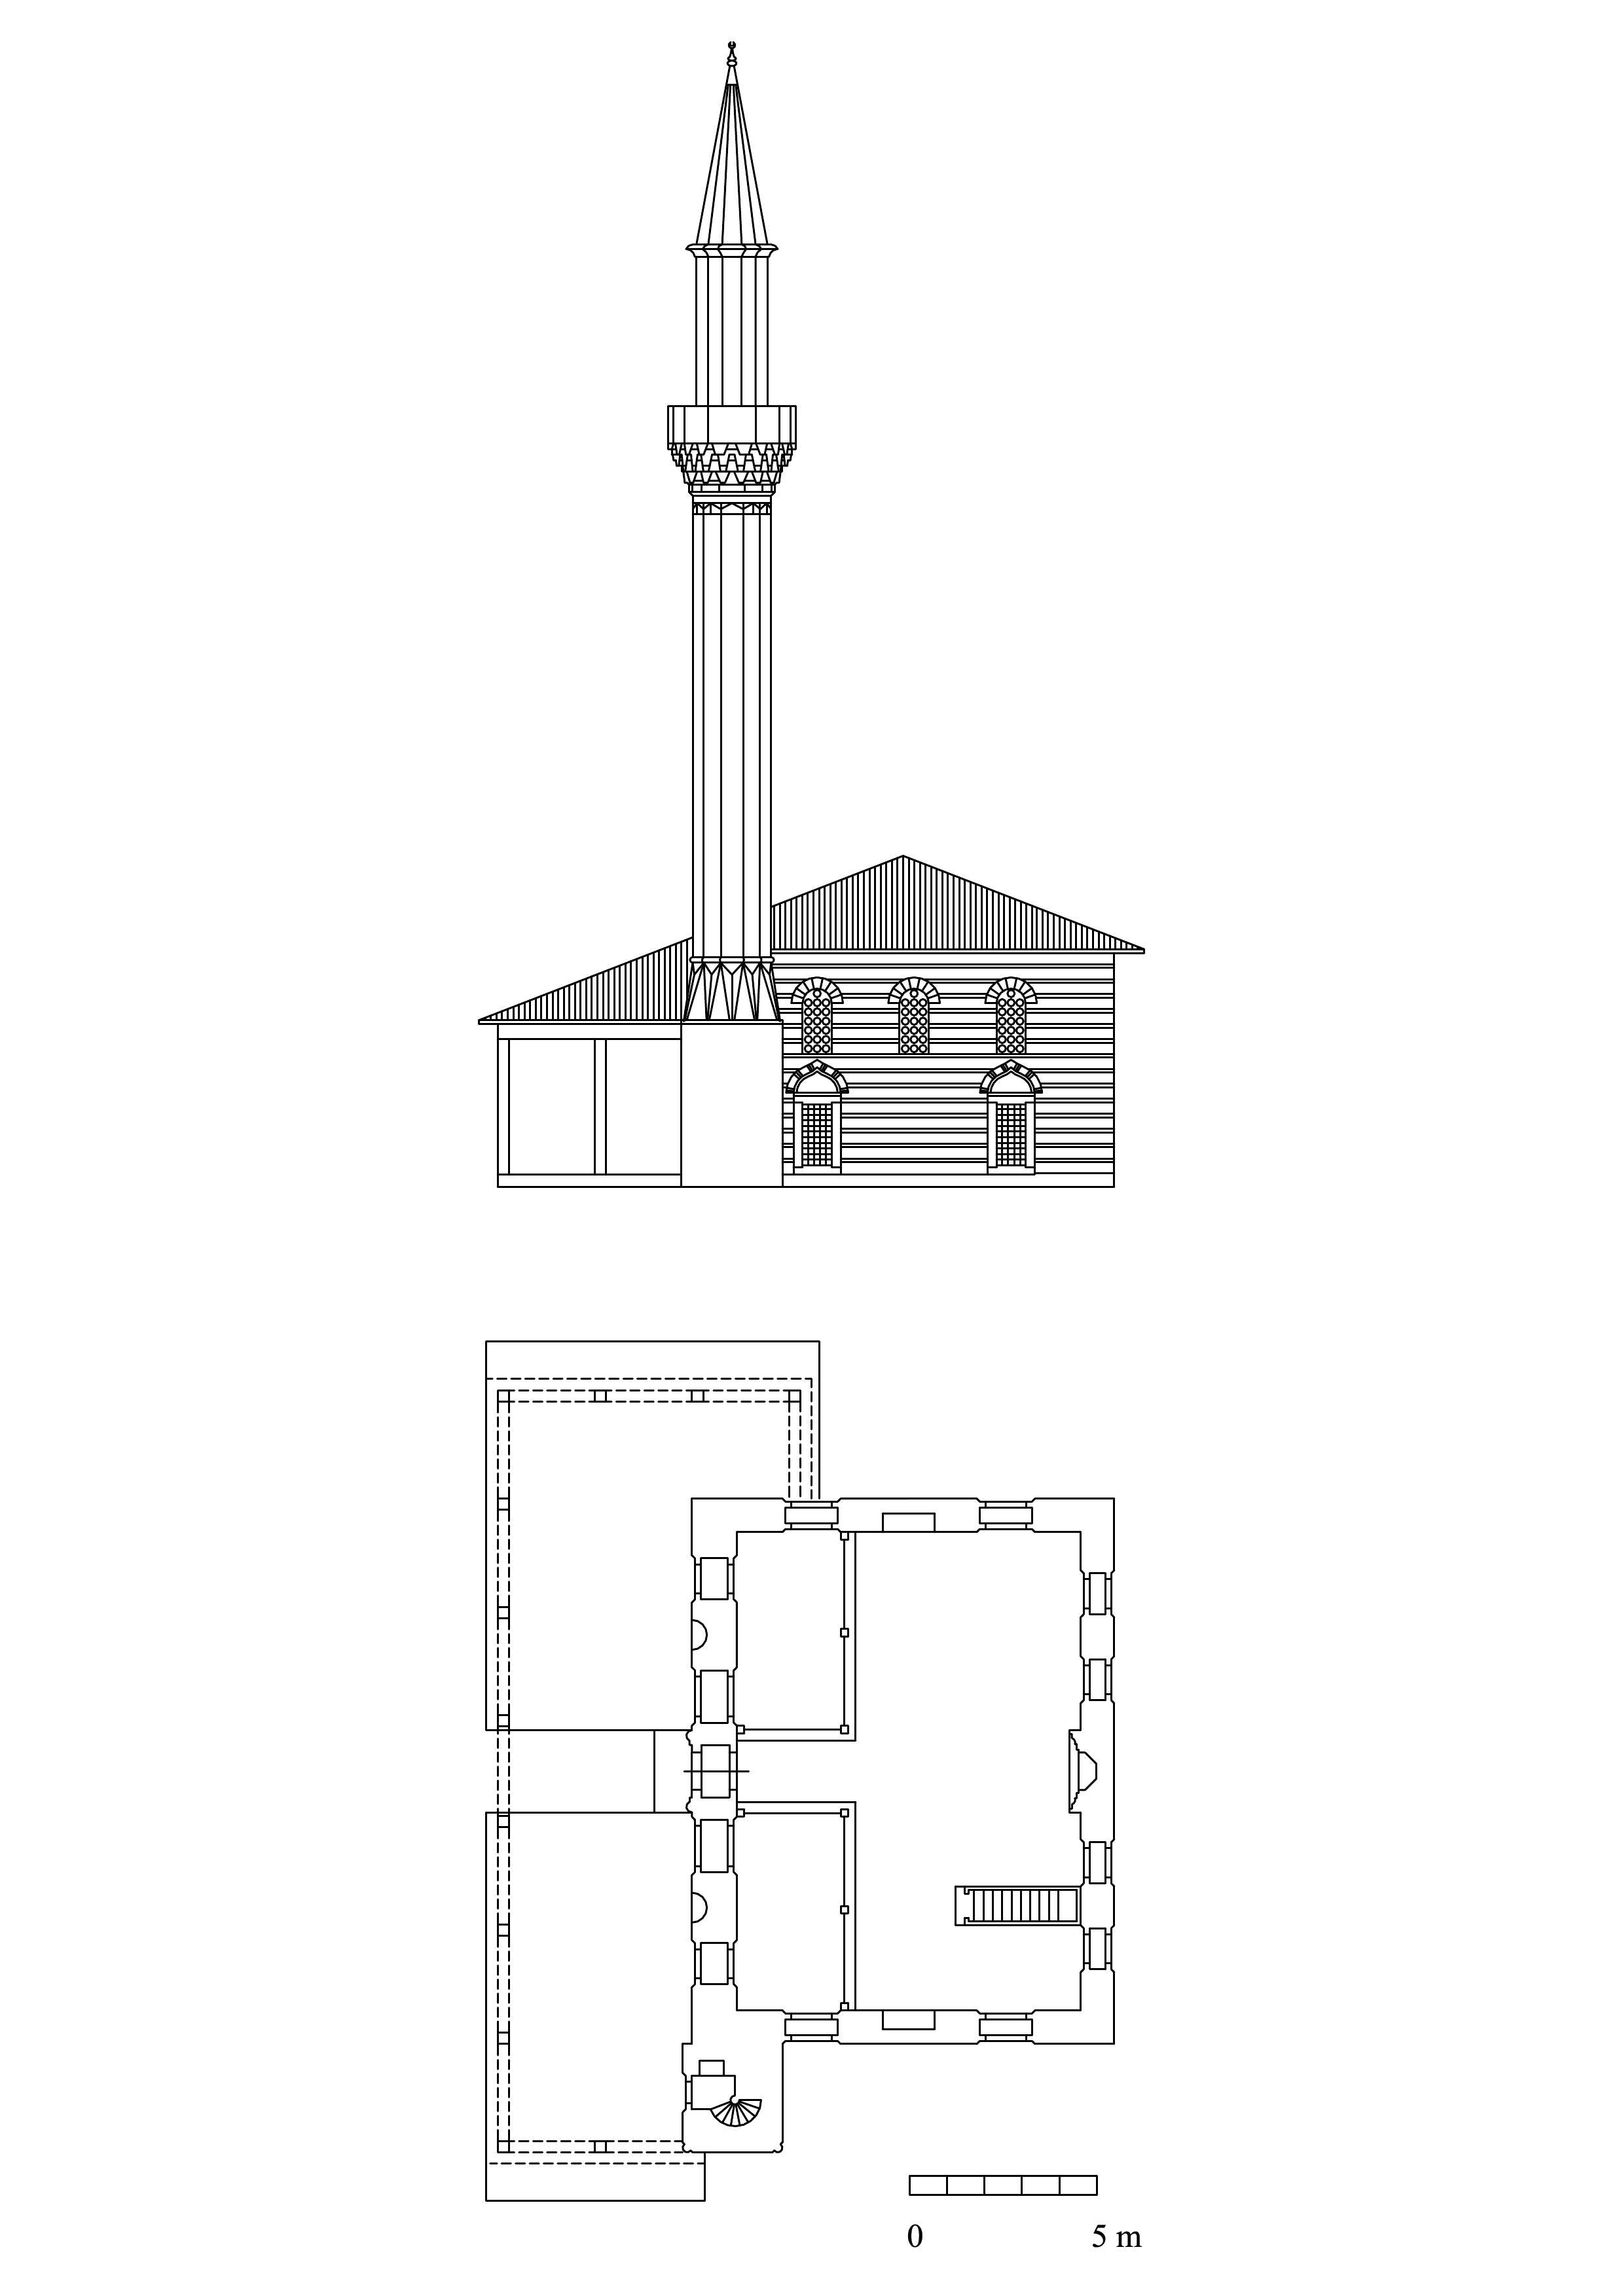 Hacı Evhad Cami - Floor plan and elevation with hypothetical reconstruction of portico. DWG file in AutoCAD 2000 format. Click the download button to download a zipped file containing the .dwg file.